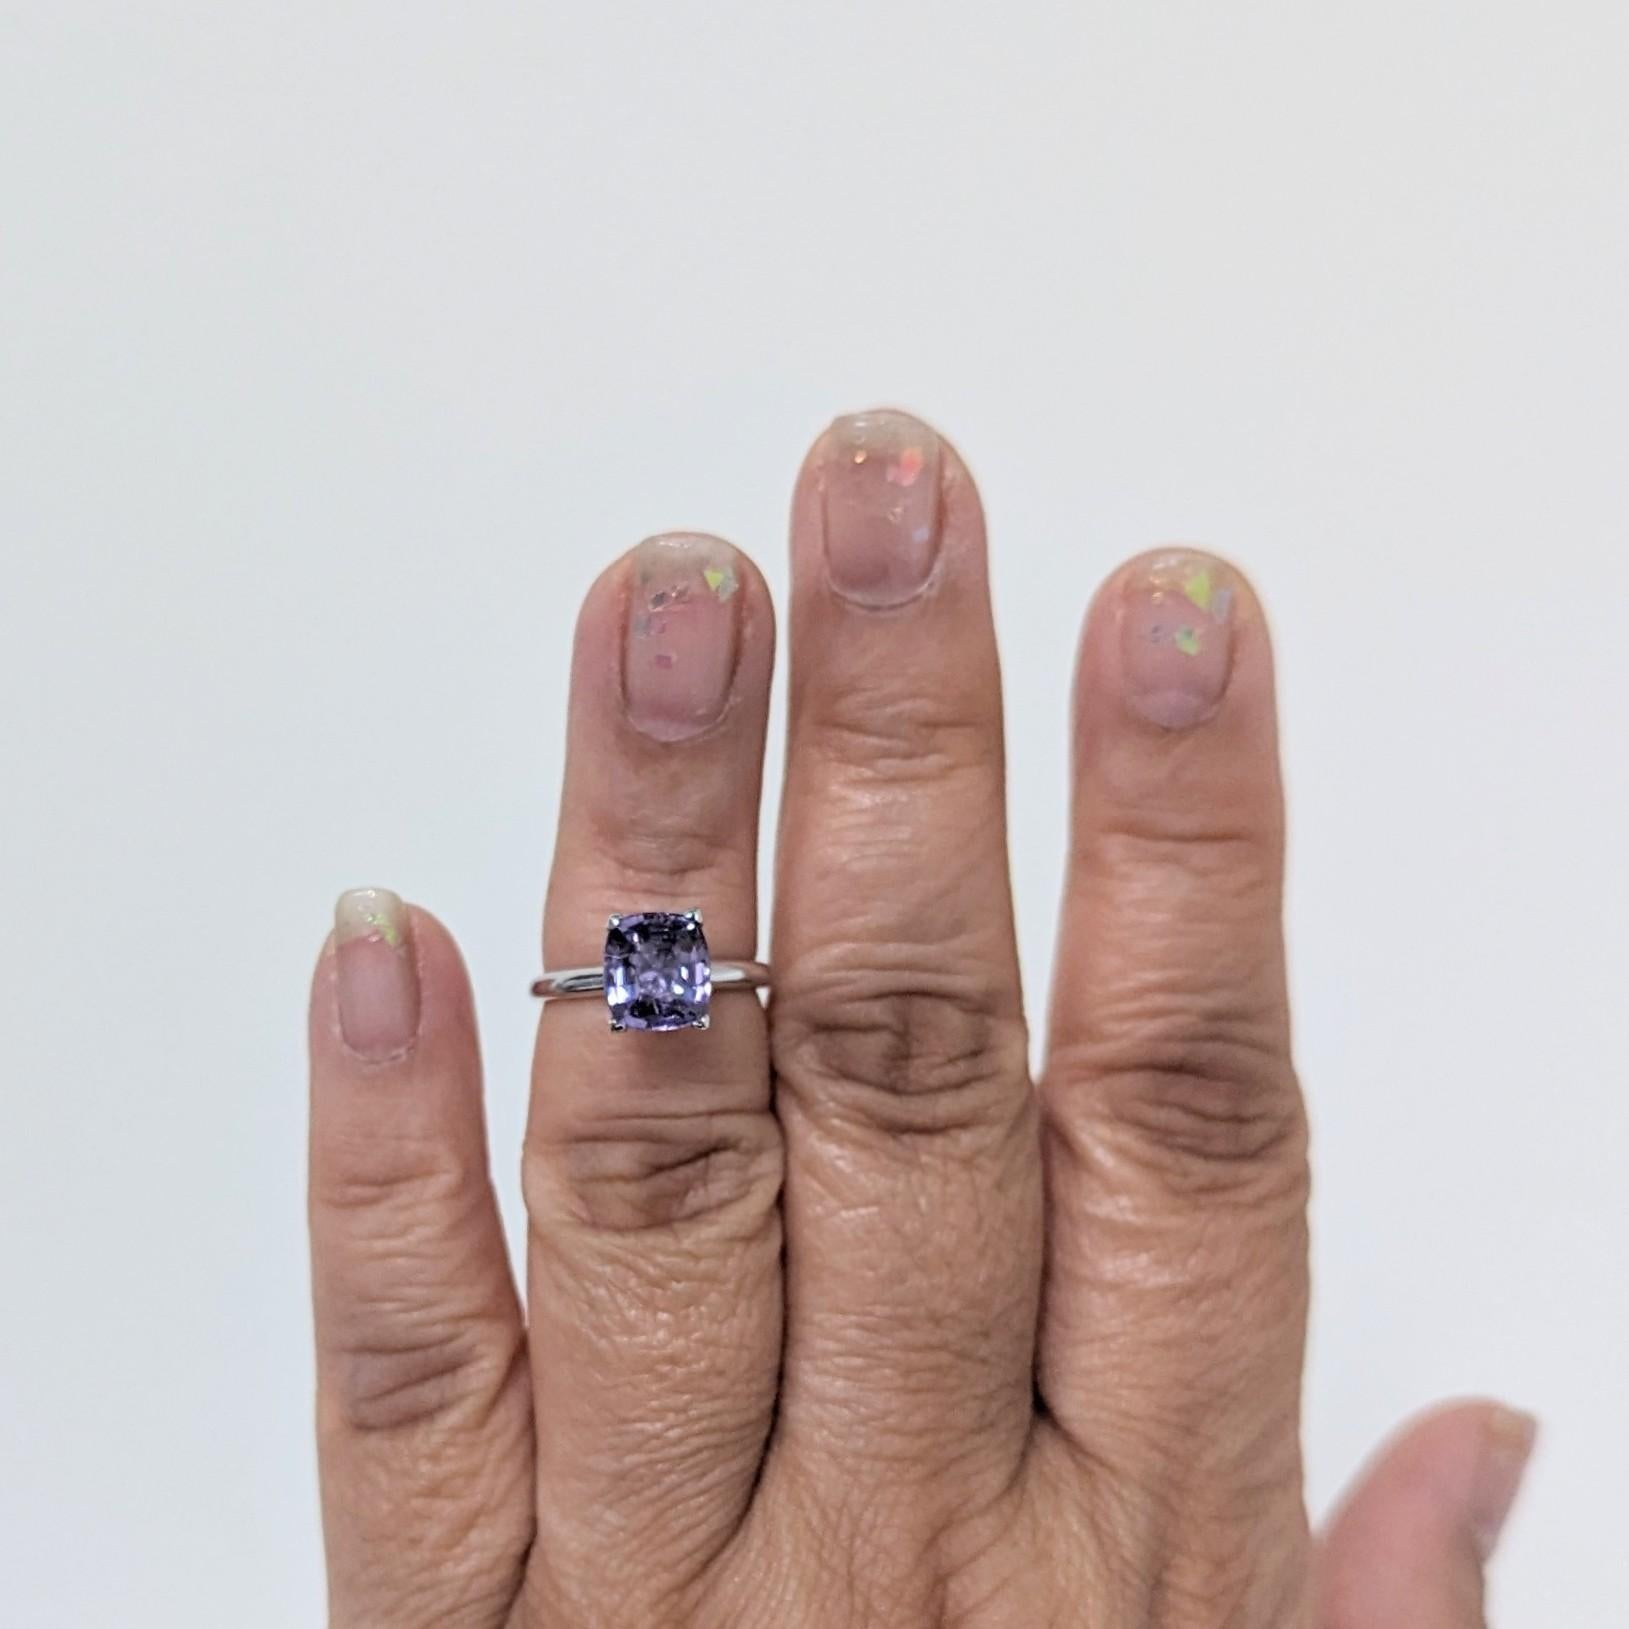 Beautiful 2.64 ct. purple spinel cushion in a handmade 14k white gold mounting.  Ring size 5.25.